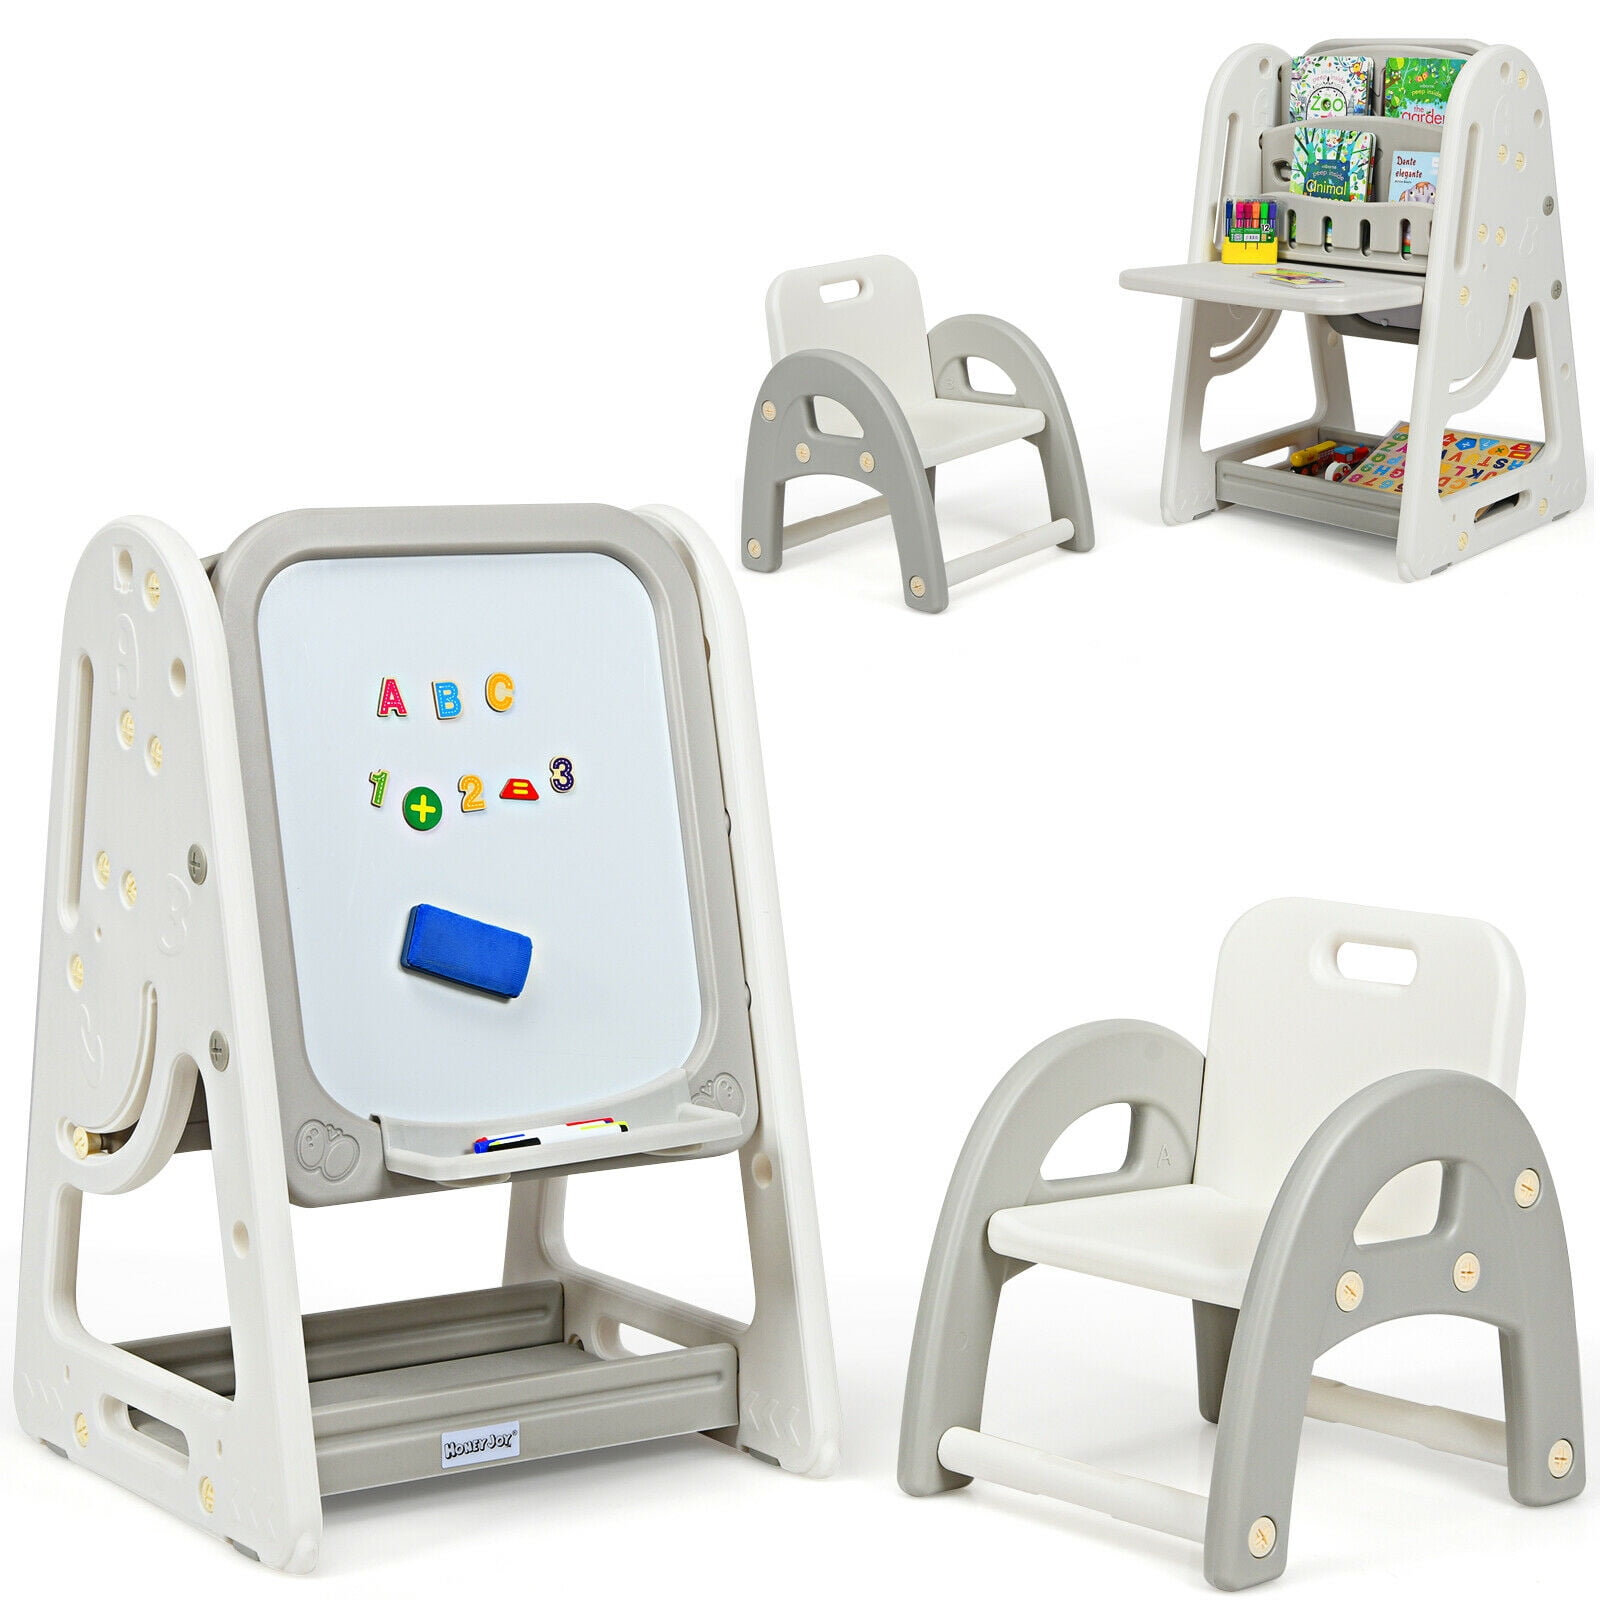 Gymax 2-in-1 Kids Wooden Art Table and Art Easel Set w/ Chairs Paper Roll  Storage Bins